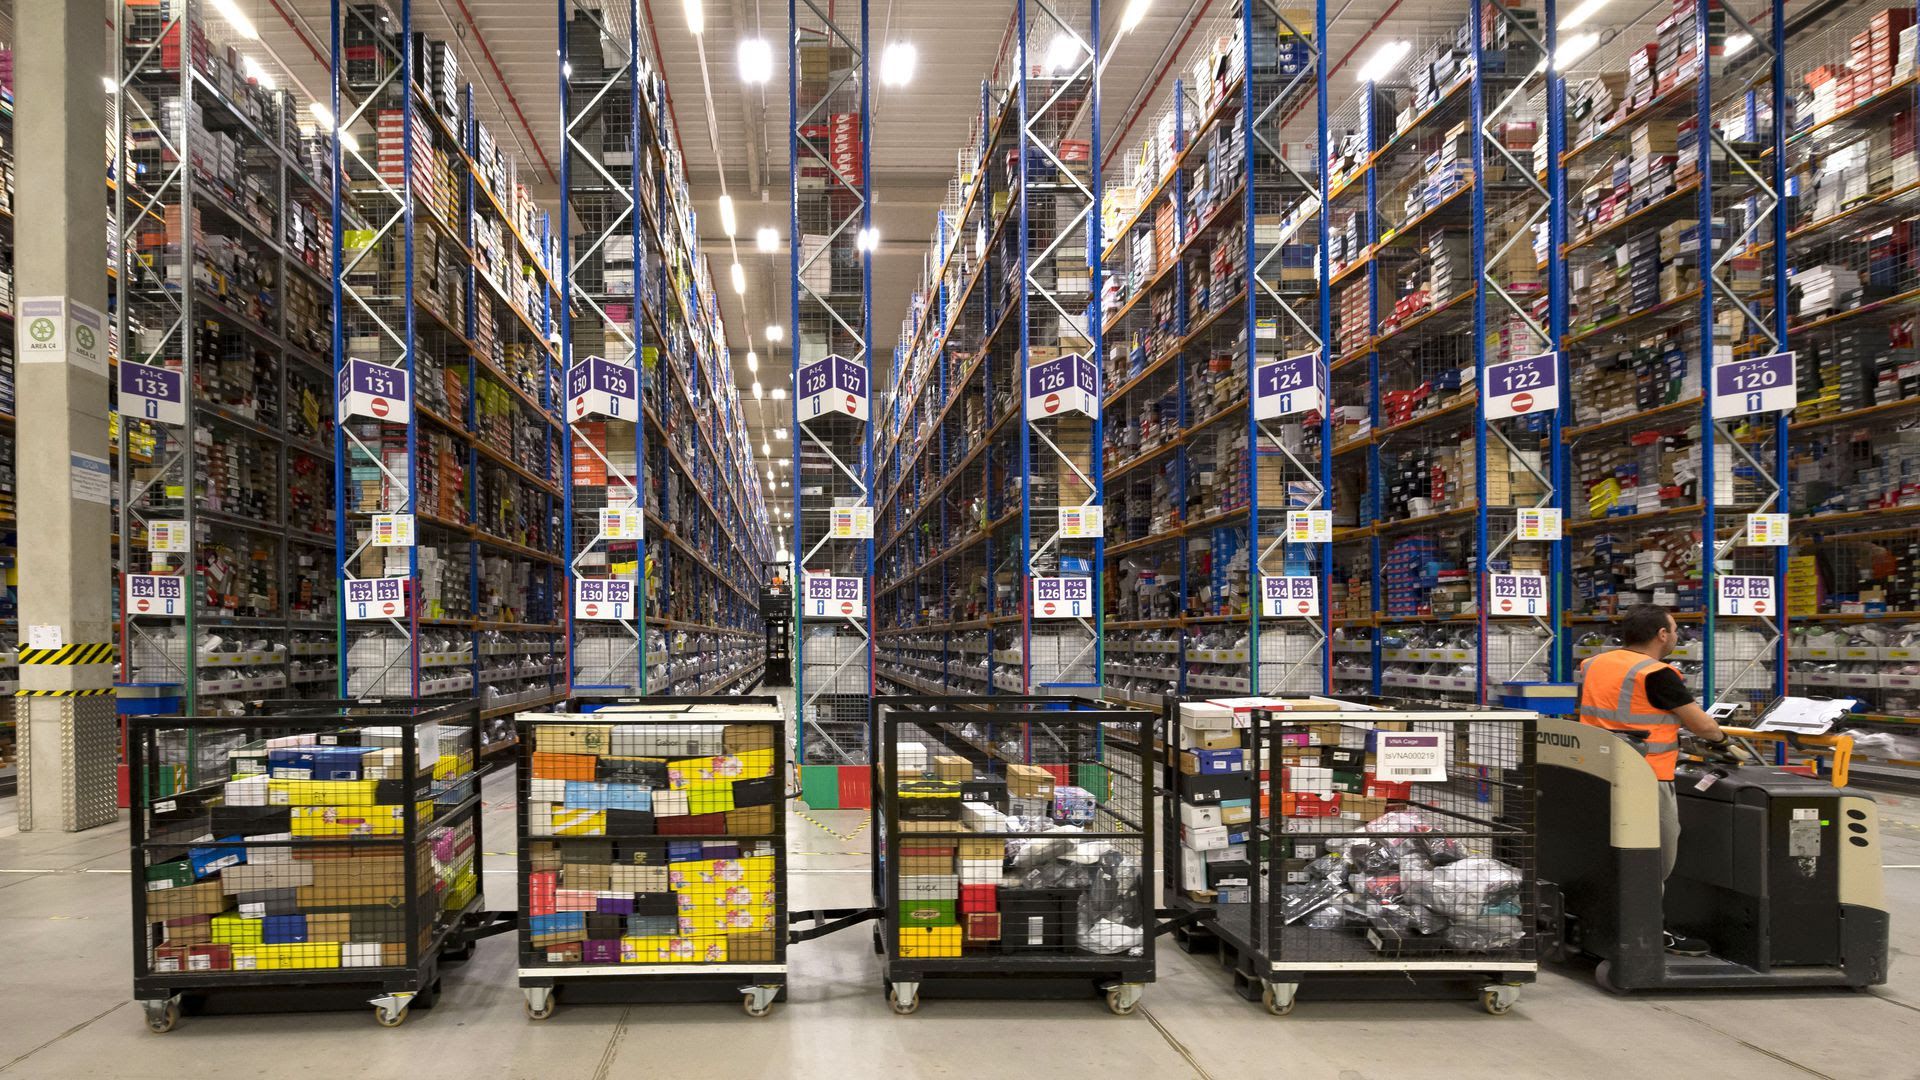 An Amazon fulfillment center, fully stocked for Black Friday. Photo: Matthew Horwood/Getty Images